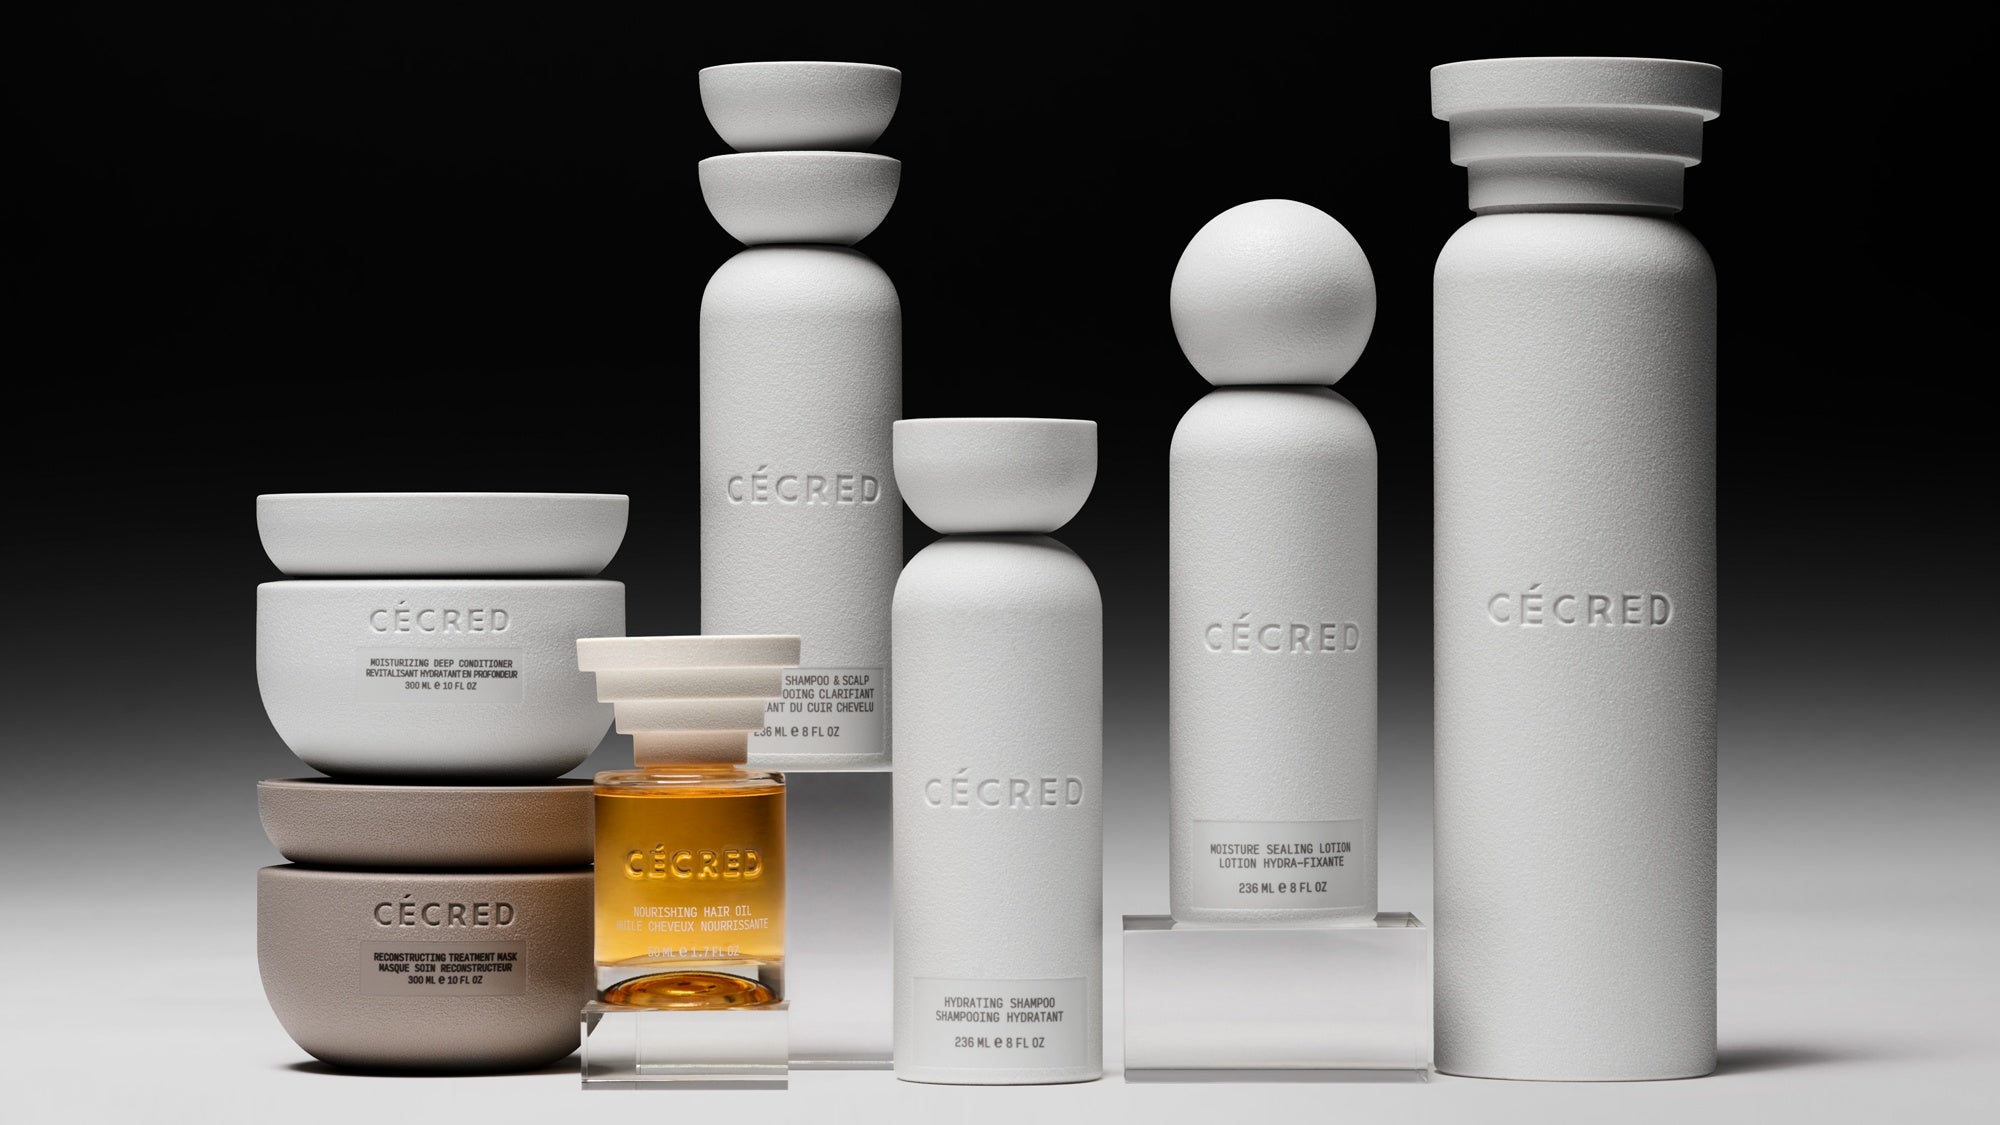 Cécred: All About Beyoncé’s New Foundation Collection